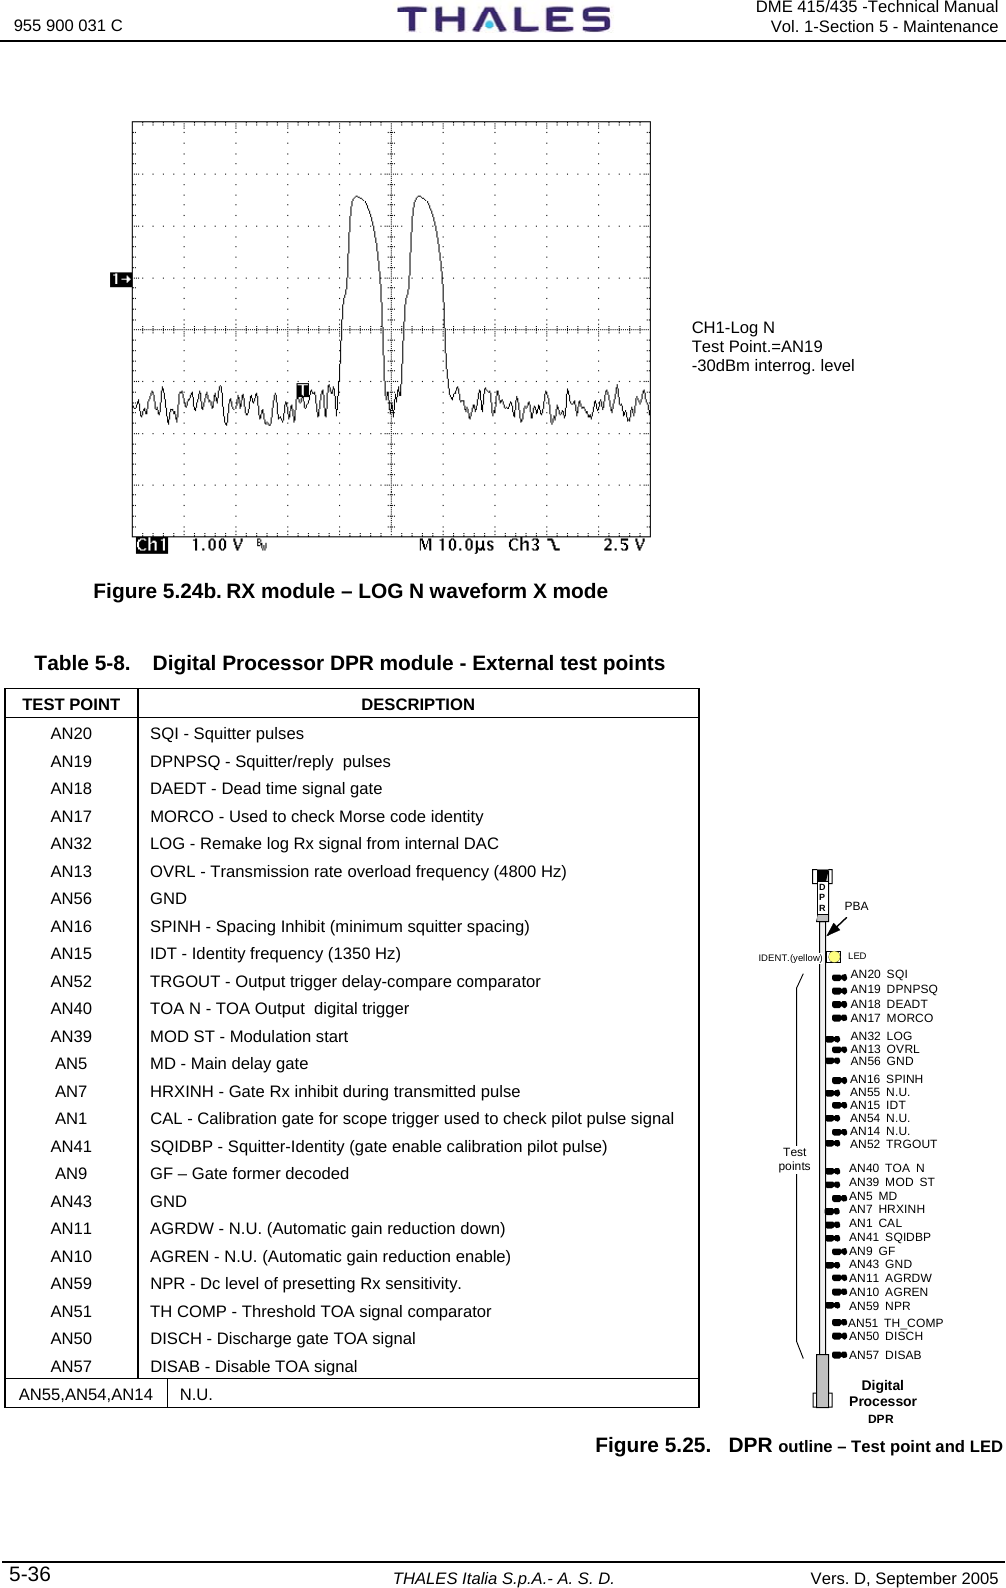  955 900 031 C   DME 415/435 -Technical ManualVol. 1-Section 5 - Maintenance 5-36 THALES Italia S.p.A.- A. S. D. Vers. D, September 2005     Figure 5.24b. RX module – LOG N waveform X mode   Table 5-8.  Digital Processor DPR module - External test points  TEST POINT  DESCRIPTION AN20  SQI - Squitter pulses AN19  DPNPSQ - Squitter/reply  pulses AN18  DAEDT - Dead time signal gate AN17  MORCO - Used to check Morse code identity AN32  LOG - Remake log Rx signal from internal DAC AN13  OVRL - Transmission rate overload frequency (4800 Hz) AN56 GND AN16  SPINH - Spacing Inhibit (minimum squitter spacing) AN15  IDT - Identity frequency (1350 Hz) AN52  TRGOUT - Output trigger delay-compare comparator AN40  TOA N - TOA Output  digital trigger  AN39  MOD ST - Modulation start AN5  MD - Main delay gate AN7  HRXINH - Gate Rx inhibit during transmitted pulse AN1  CAL - Calibration gate for scope trigger used to check pilot pulse signal AN41  SQIDBP - Squitter-Identity (gate enable calibration pilot pulse) AN9  GF – Gate former decoded AN43 GND AN11  AGRDW - N.U. (Automatic gain reduction down) AN10  AGREN - N.U. (Automatic gain reduction enable) AN59  NPR - Dc level of presetting Rx sensitivity. AN51  TH COMP - Threshold TOA signal comparator  AN50  DISCH - Discharge gate TOA signal AN57  DISAB - Disable TOA signal AN55,AN54,AN14 N.U. Figure 5.25.  DPR outline – Test point and LED  DigitalProcessorIDENT.(yellow)AN40 TOA NAN39 MOD STAN5 MDAN1 CALAN41 SQIDBPAN43 GNDAN19 DPNPSQAN18 DEADTAN17 MORCOAN20 SQIPBALEDTest pointsDPRDPR AN32 LOGAN56 GNDAN16 SPINHAN55 N.U.AN15 IDTAN13 OVRLAN54 N.U.AN14 N.U.AN52 TRGOUTAN7 HRXINHAN9 GFAN11 AGRDWAN10 AGRENAN59 NPRAN51 TH_COMPAN50 DISCHAN57 DISABCH1-Log N  Test Point.=AN19 -30dBm interrog. level  